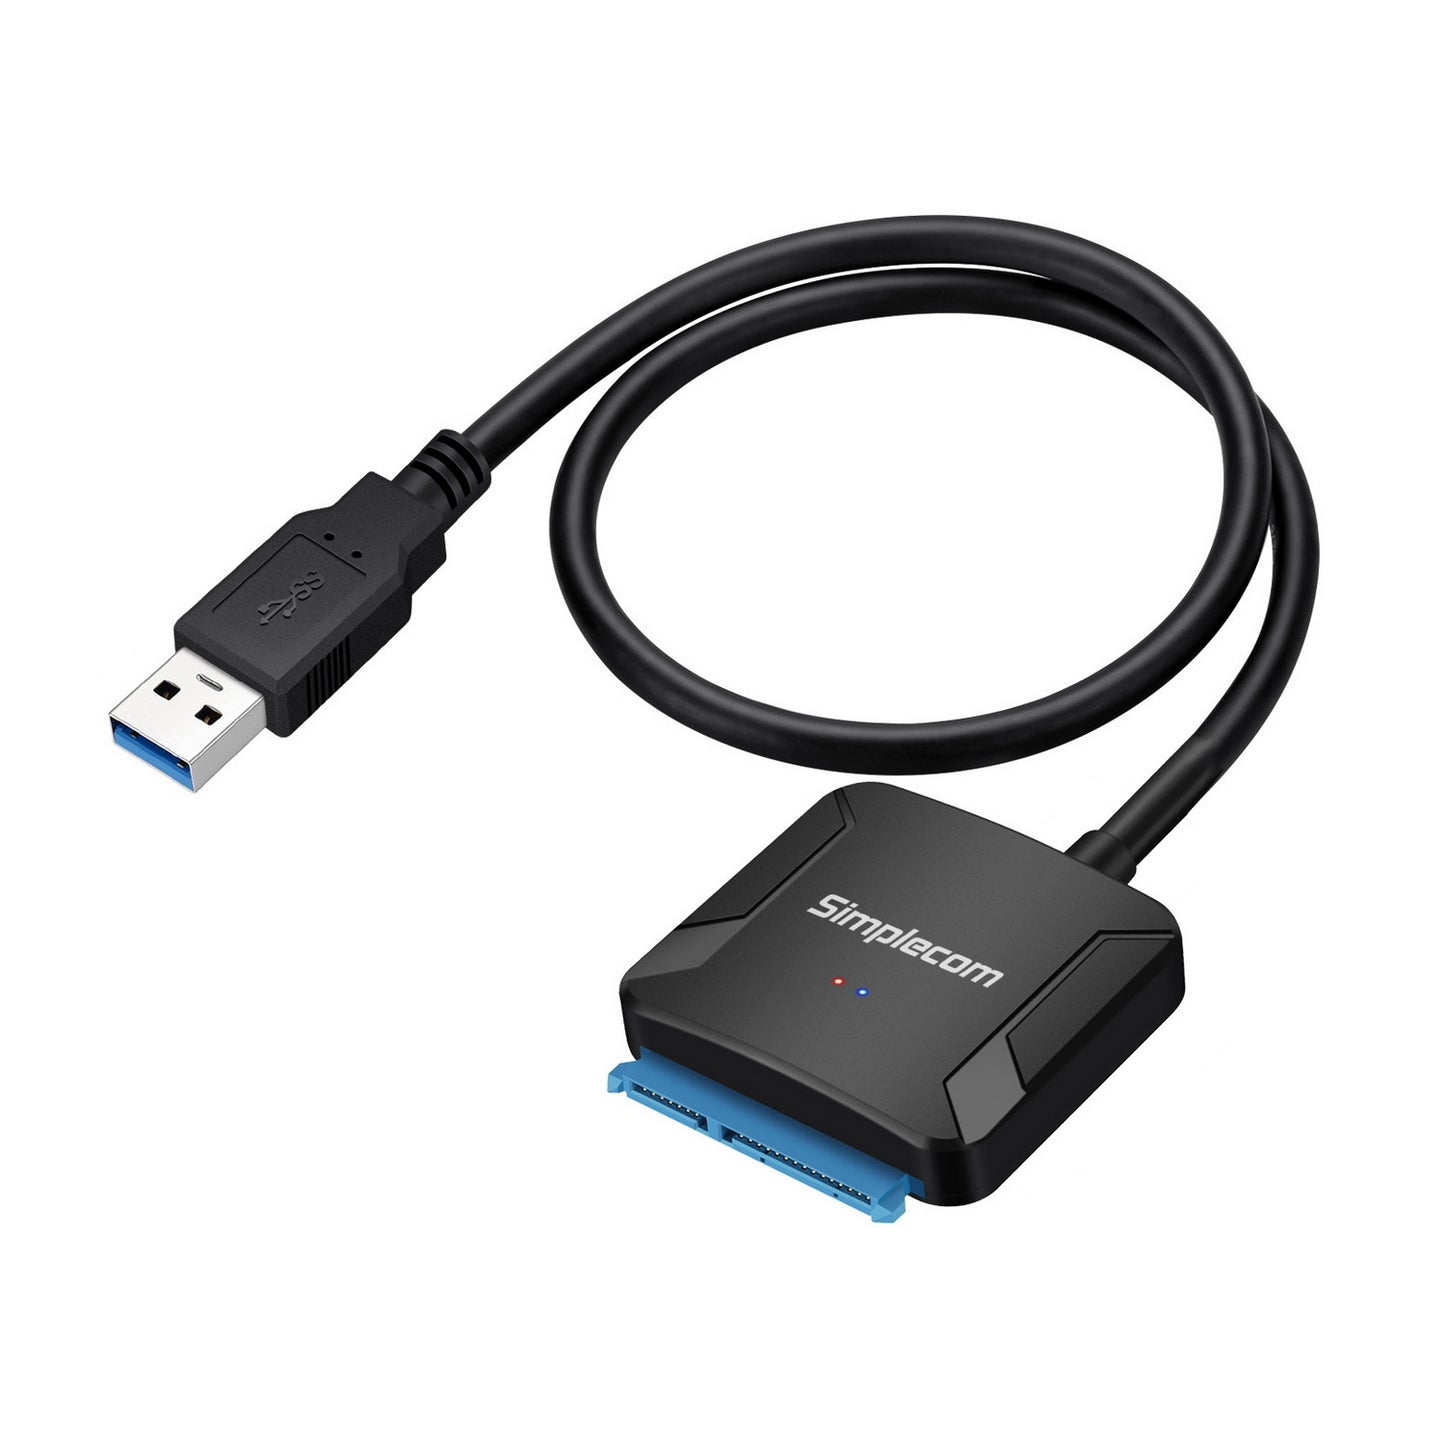 Simplecom SA236 USB 3.0 to SATA Adapter Cable Converter with Power Supply for 2.5" & 3.5" HDD SSD